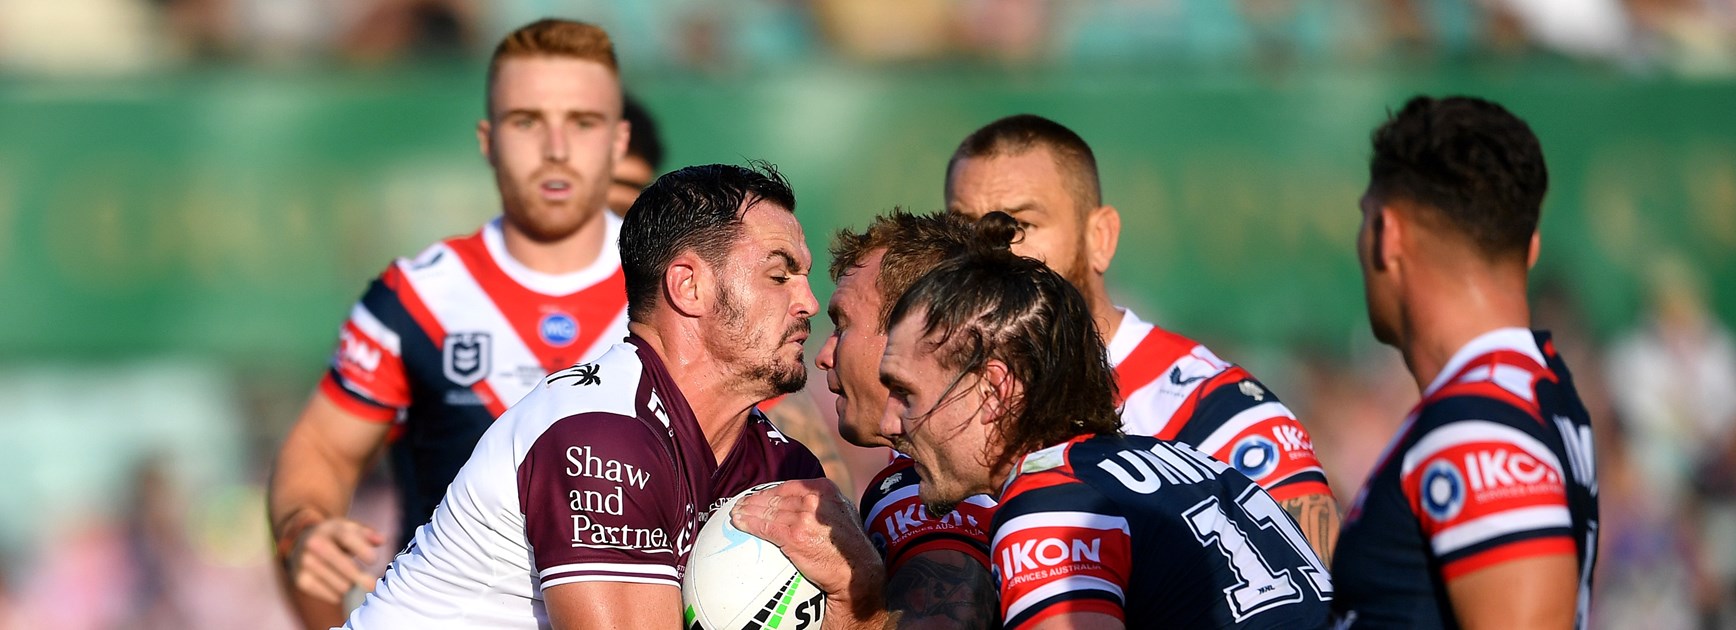 Sea Eagles lose to Roosters in opener